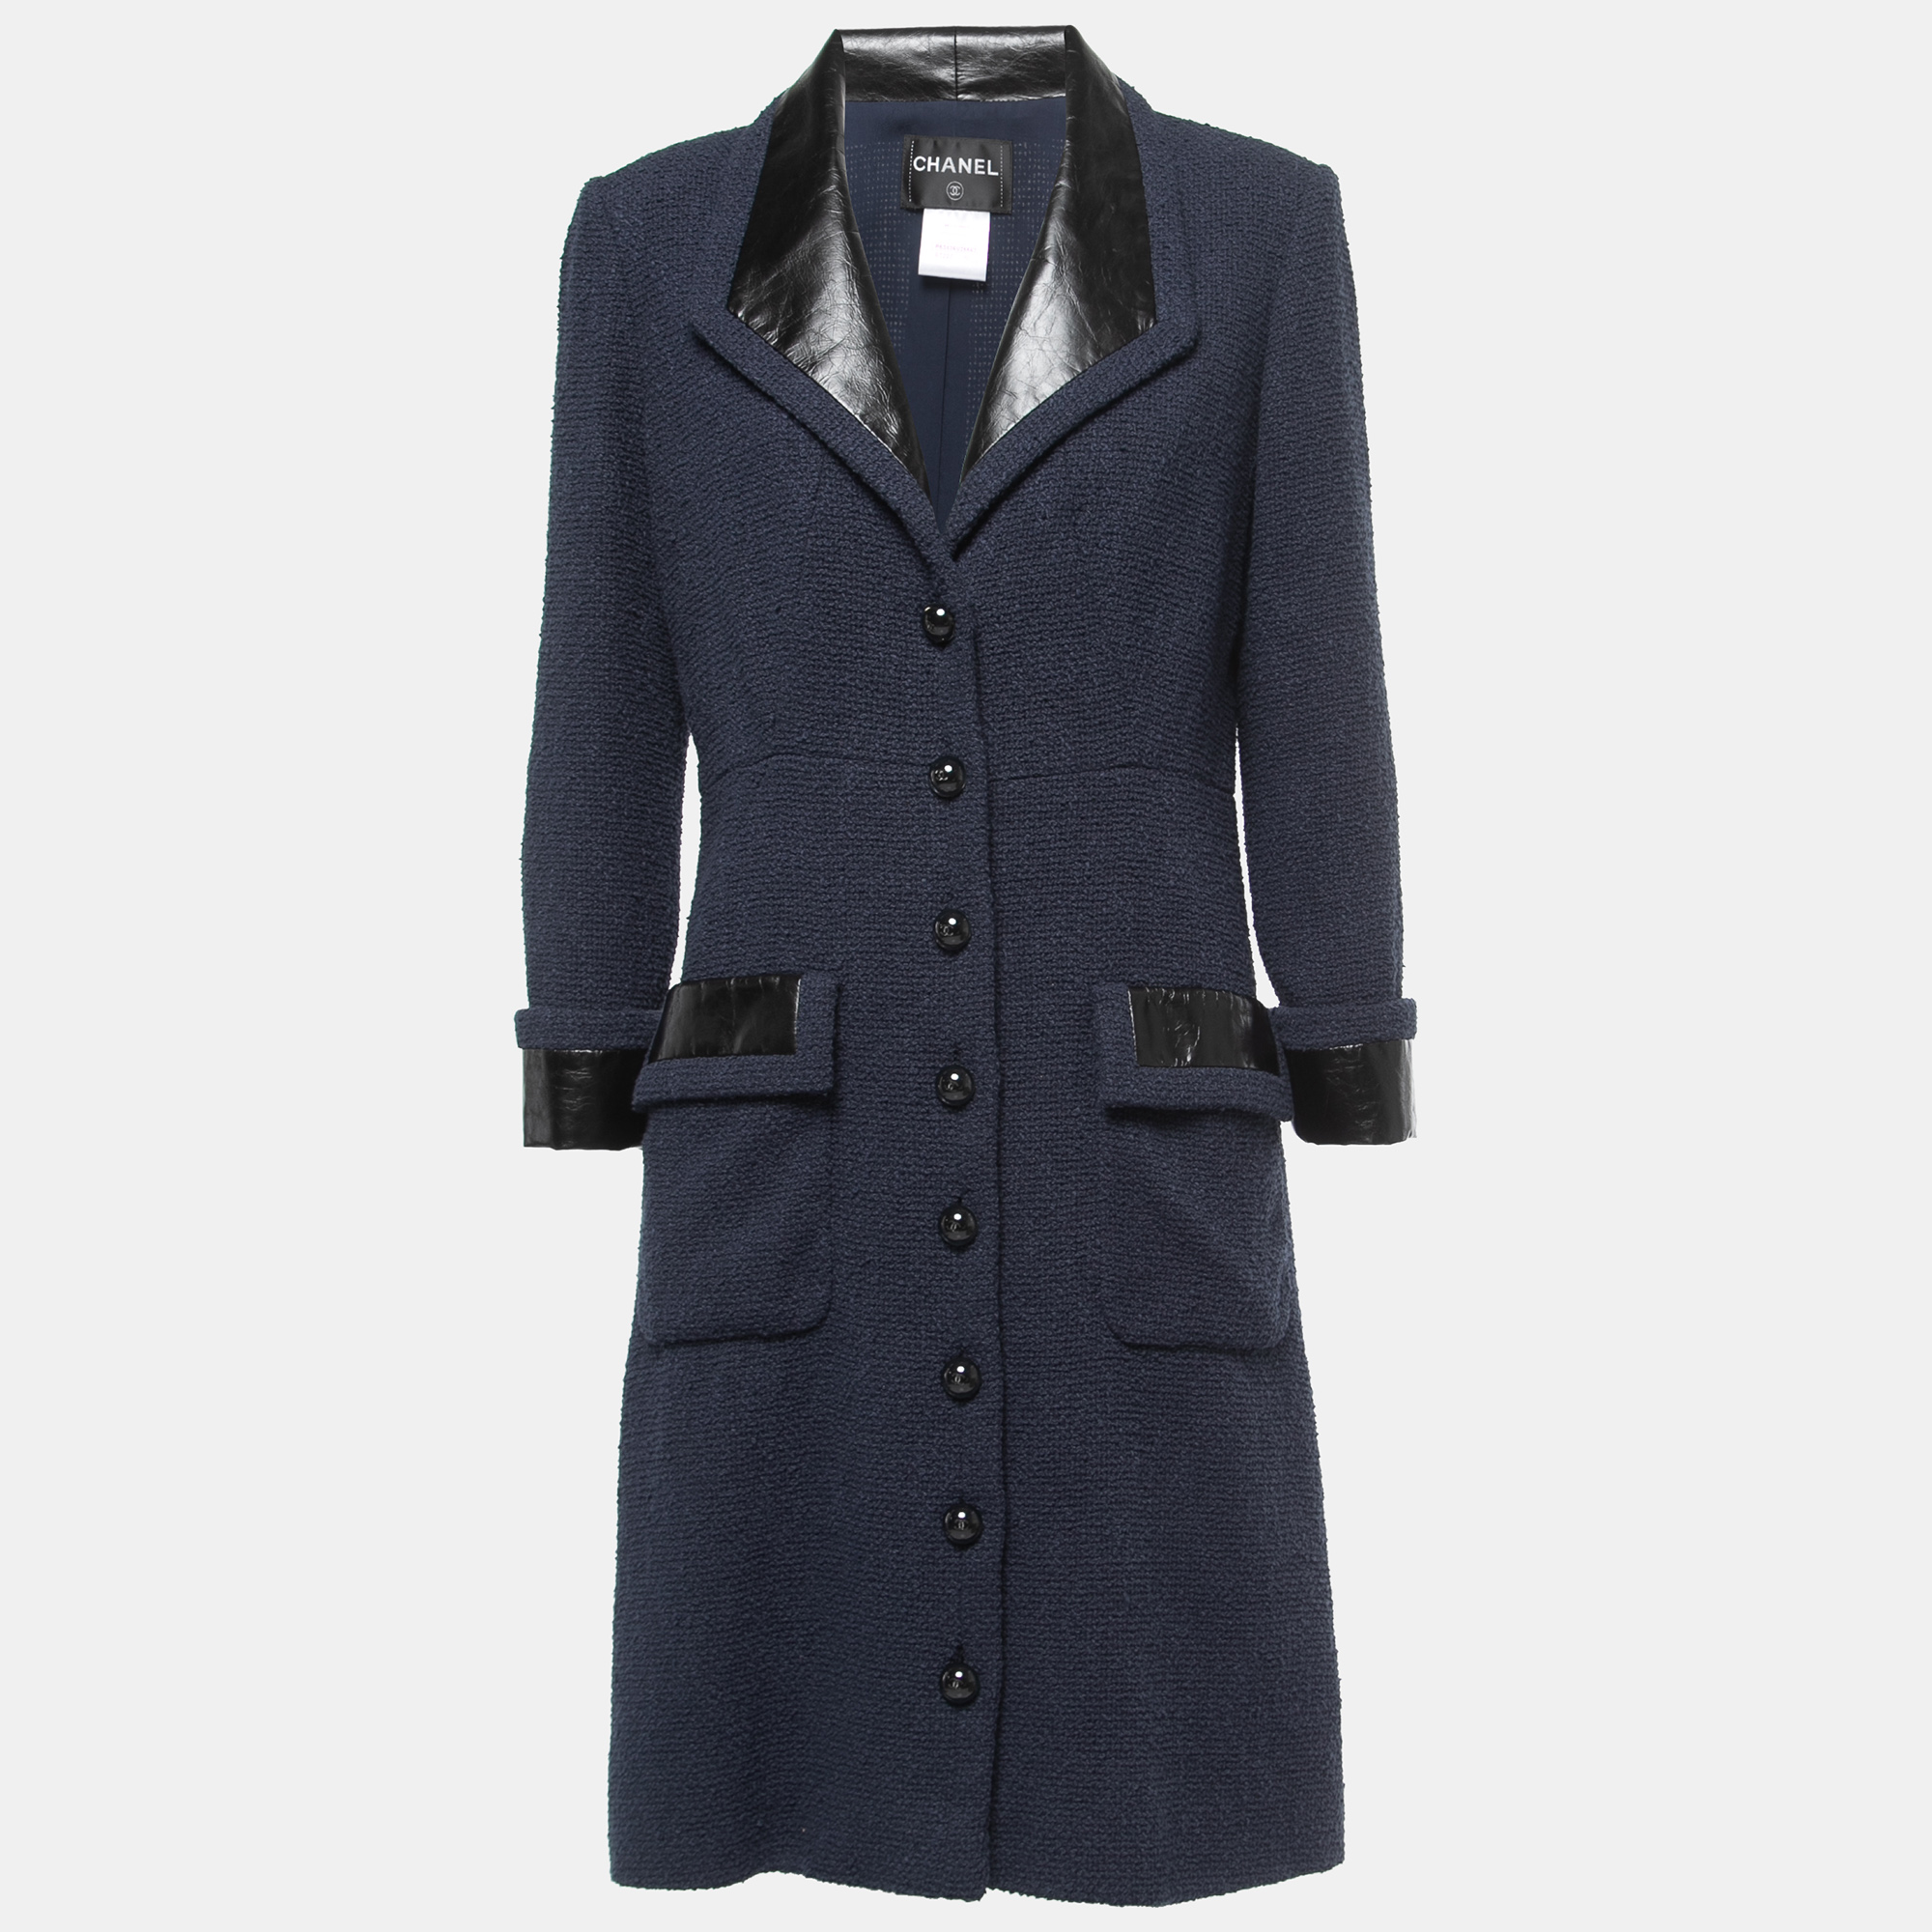 Chanel navy blue terry calfskin trimmed mid-length coat l